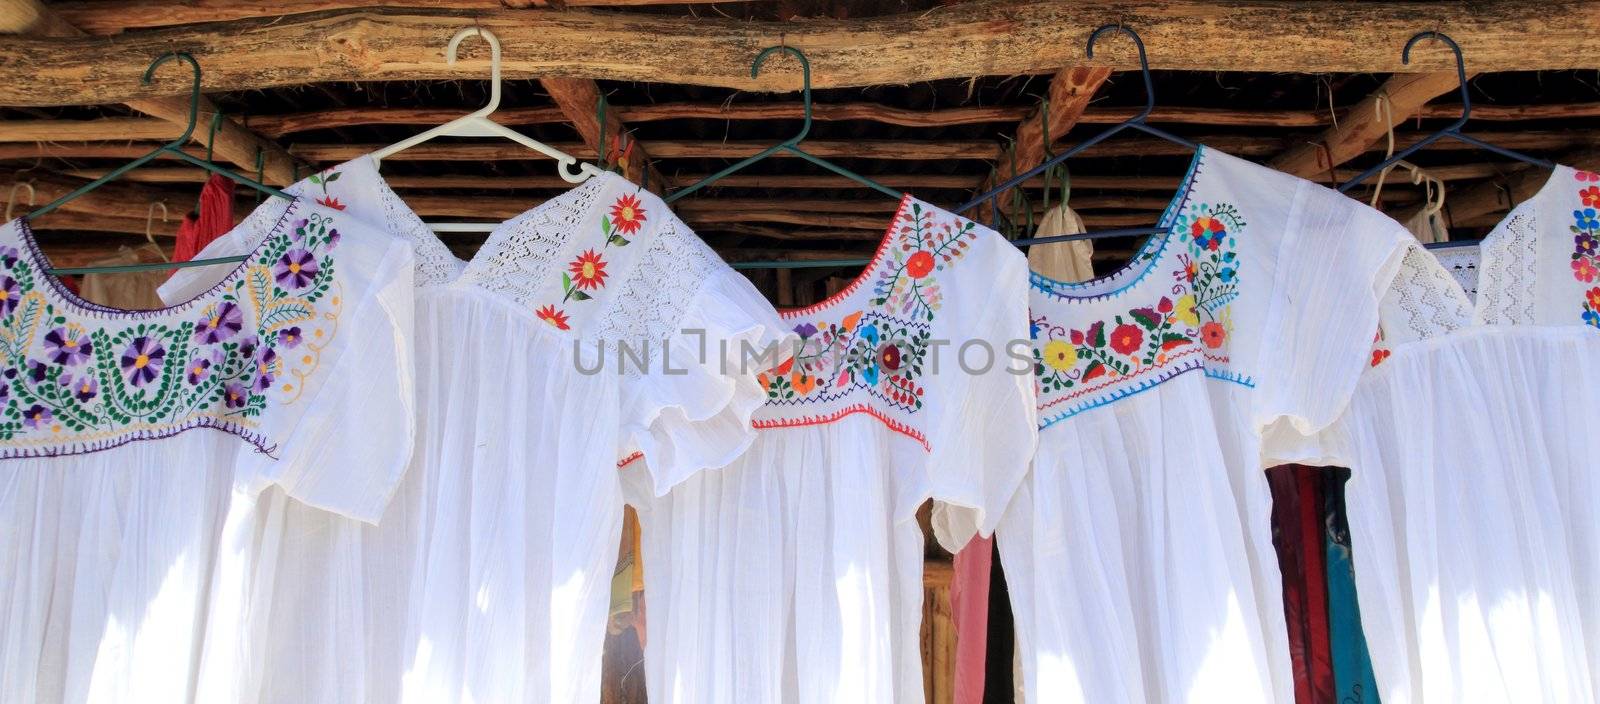 chiapas mayan white dress embroided with flowers